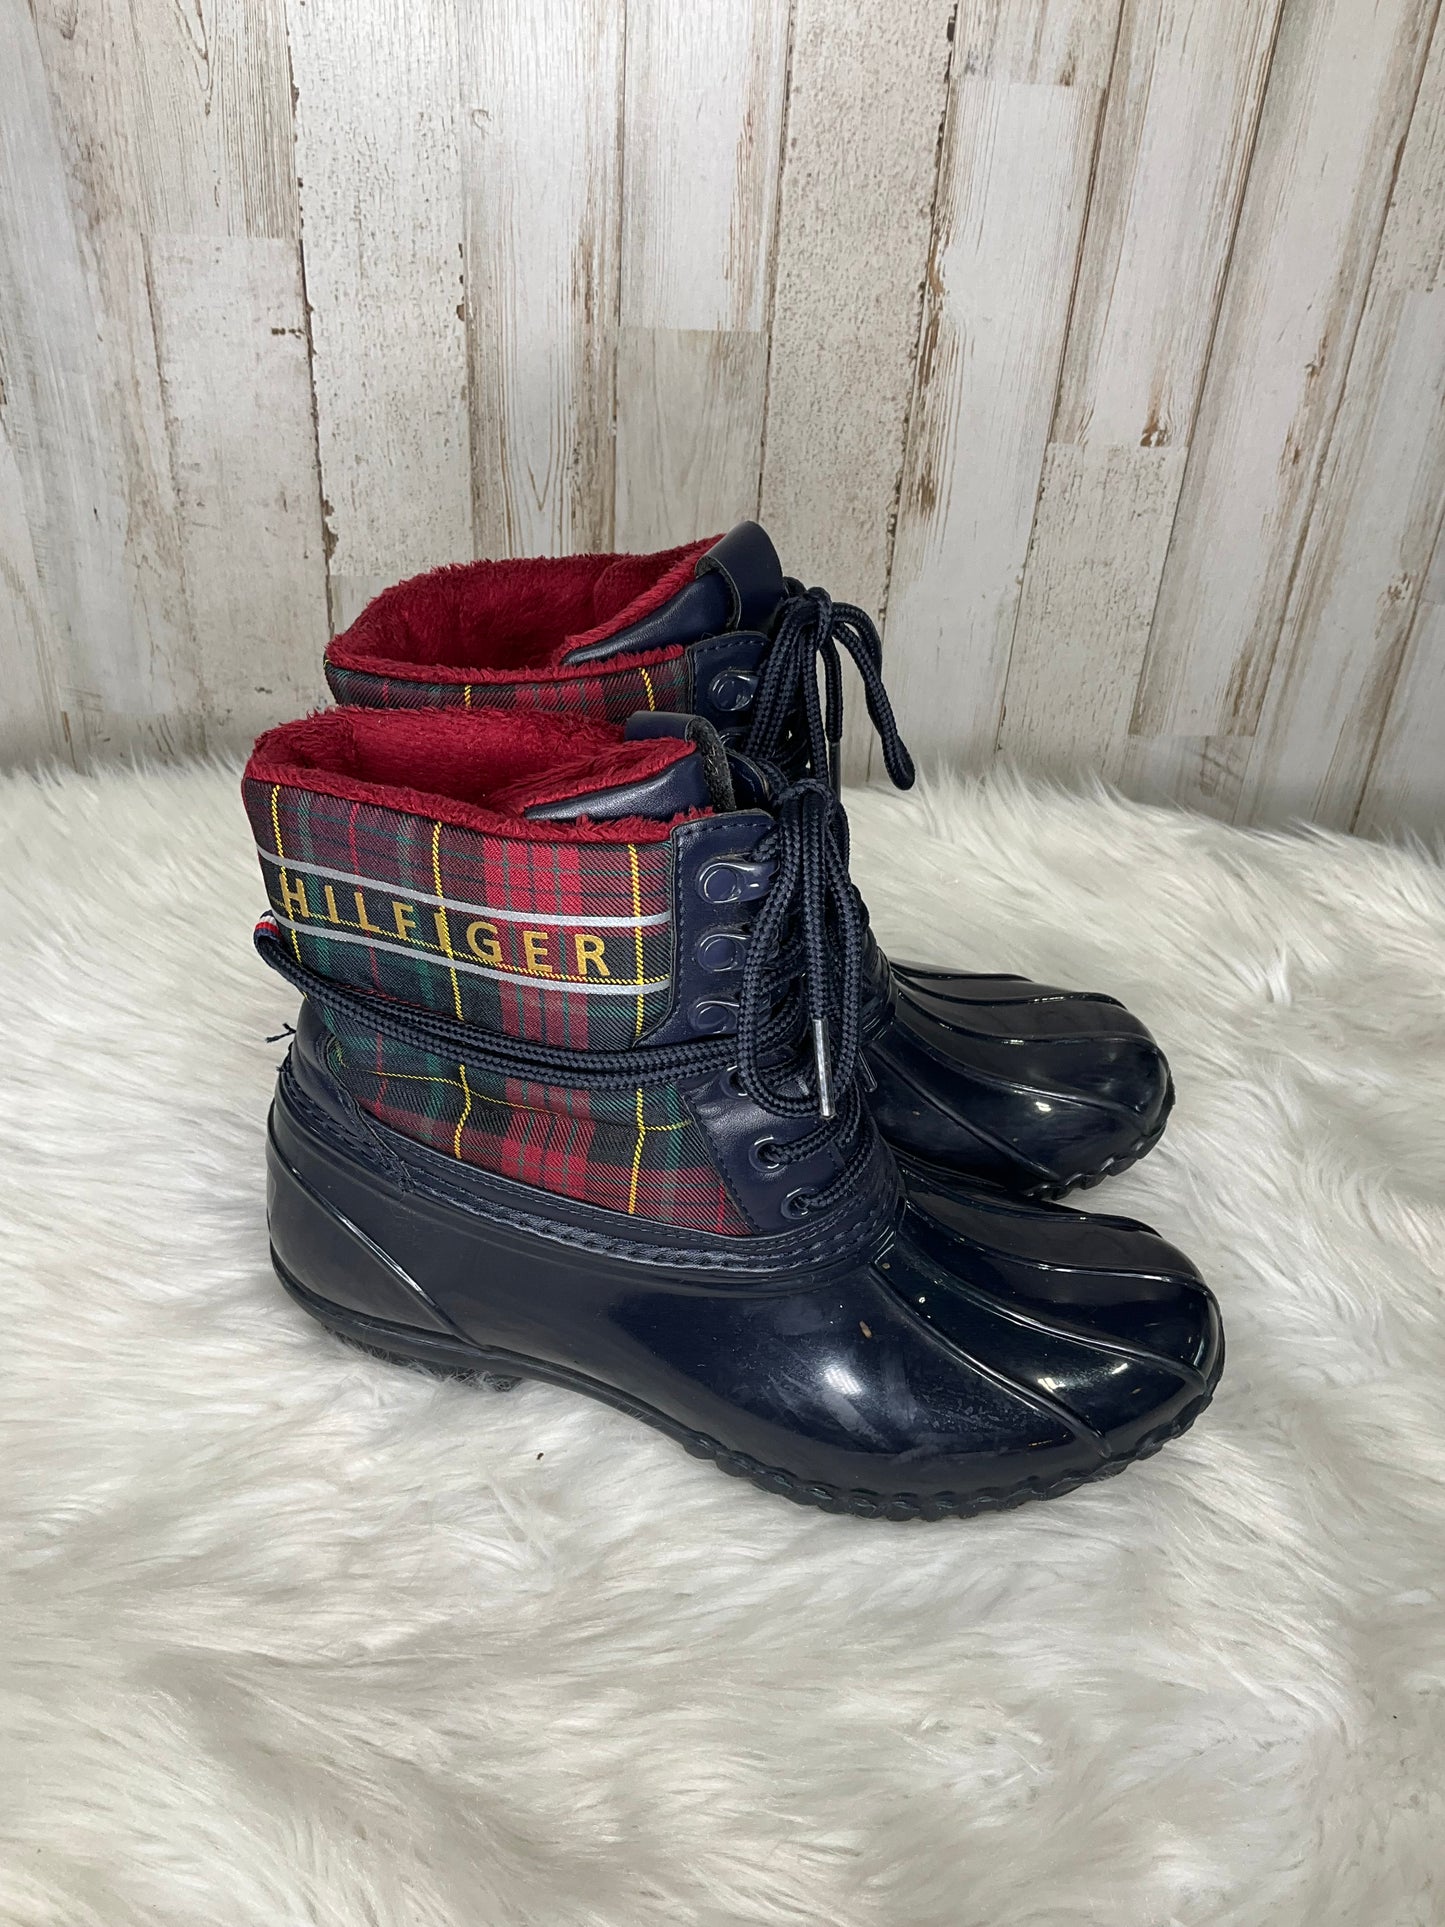 Boots Ankle Heels By Tommy Hilfiger  Size: 6